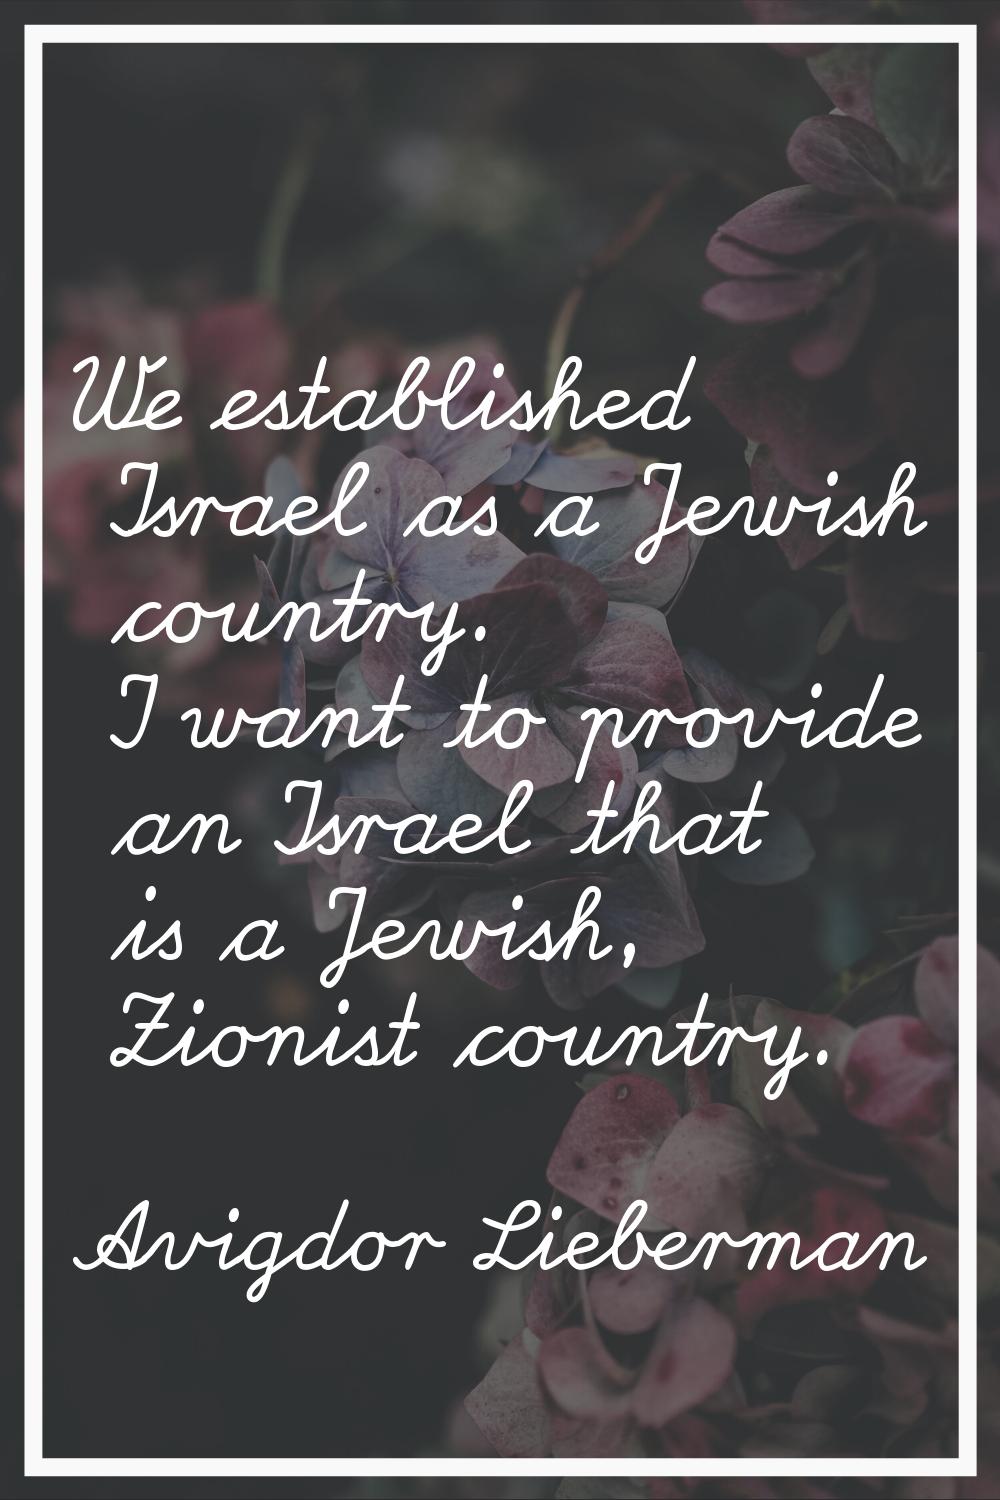 We established Israel as a Jewish country. I want to provide an Israel that is a Jewish, Zionist co